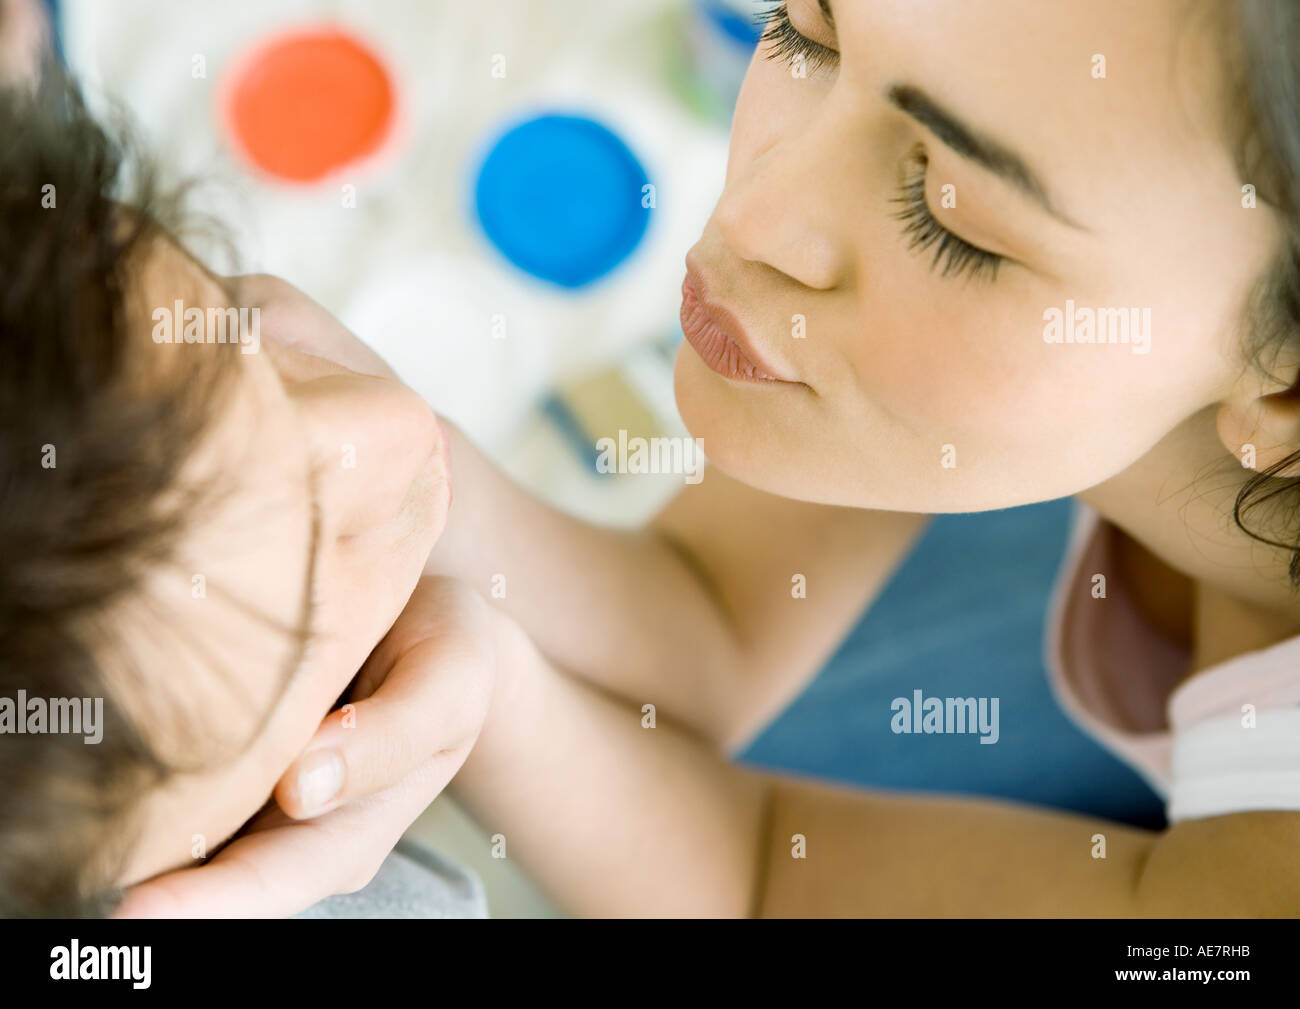 Woman holding man's face and puckering lips for a kiss, high angle view Stock Photo